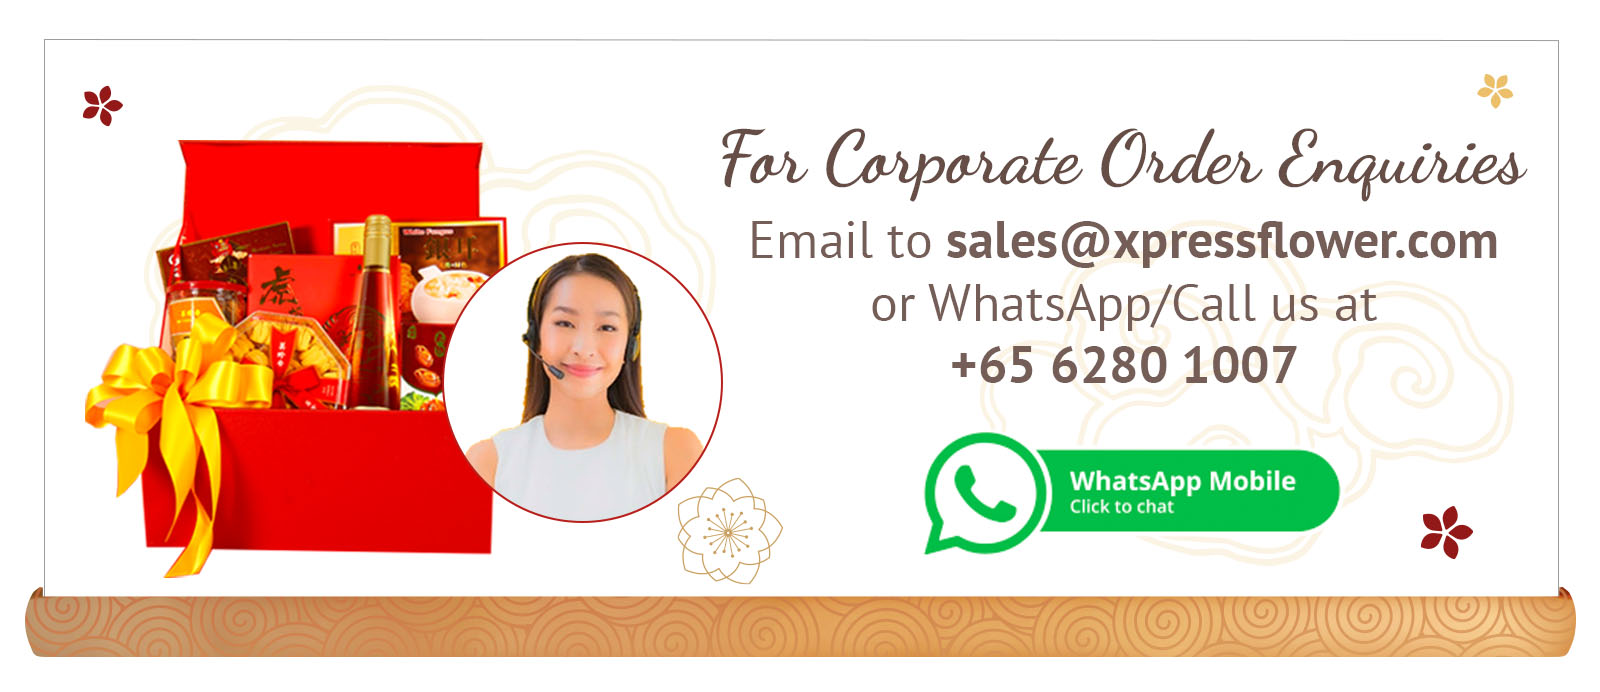 Click to Whatsapp us for CNY Corporate Orders Enquires 